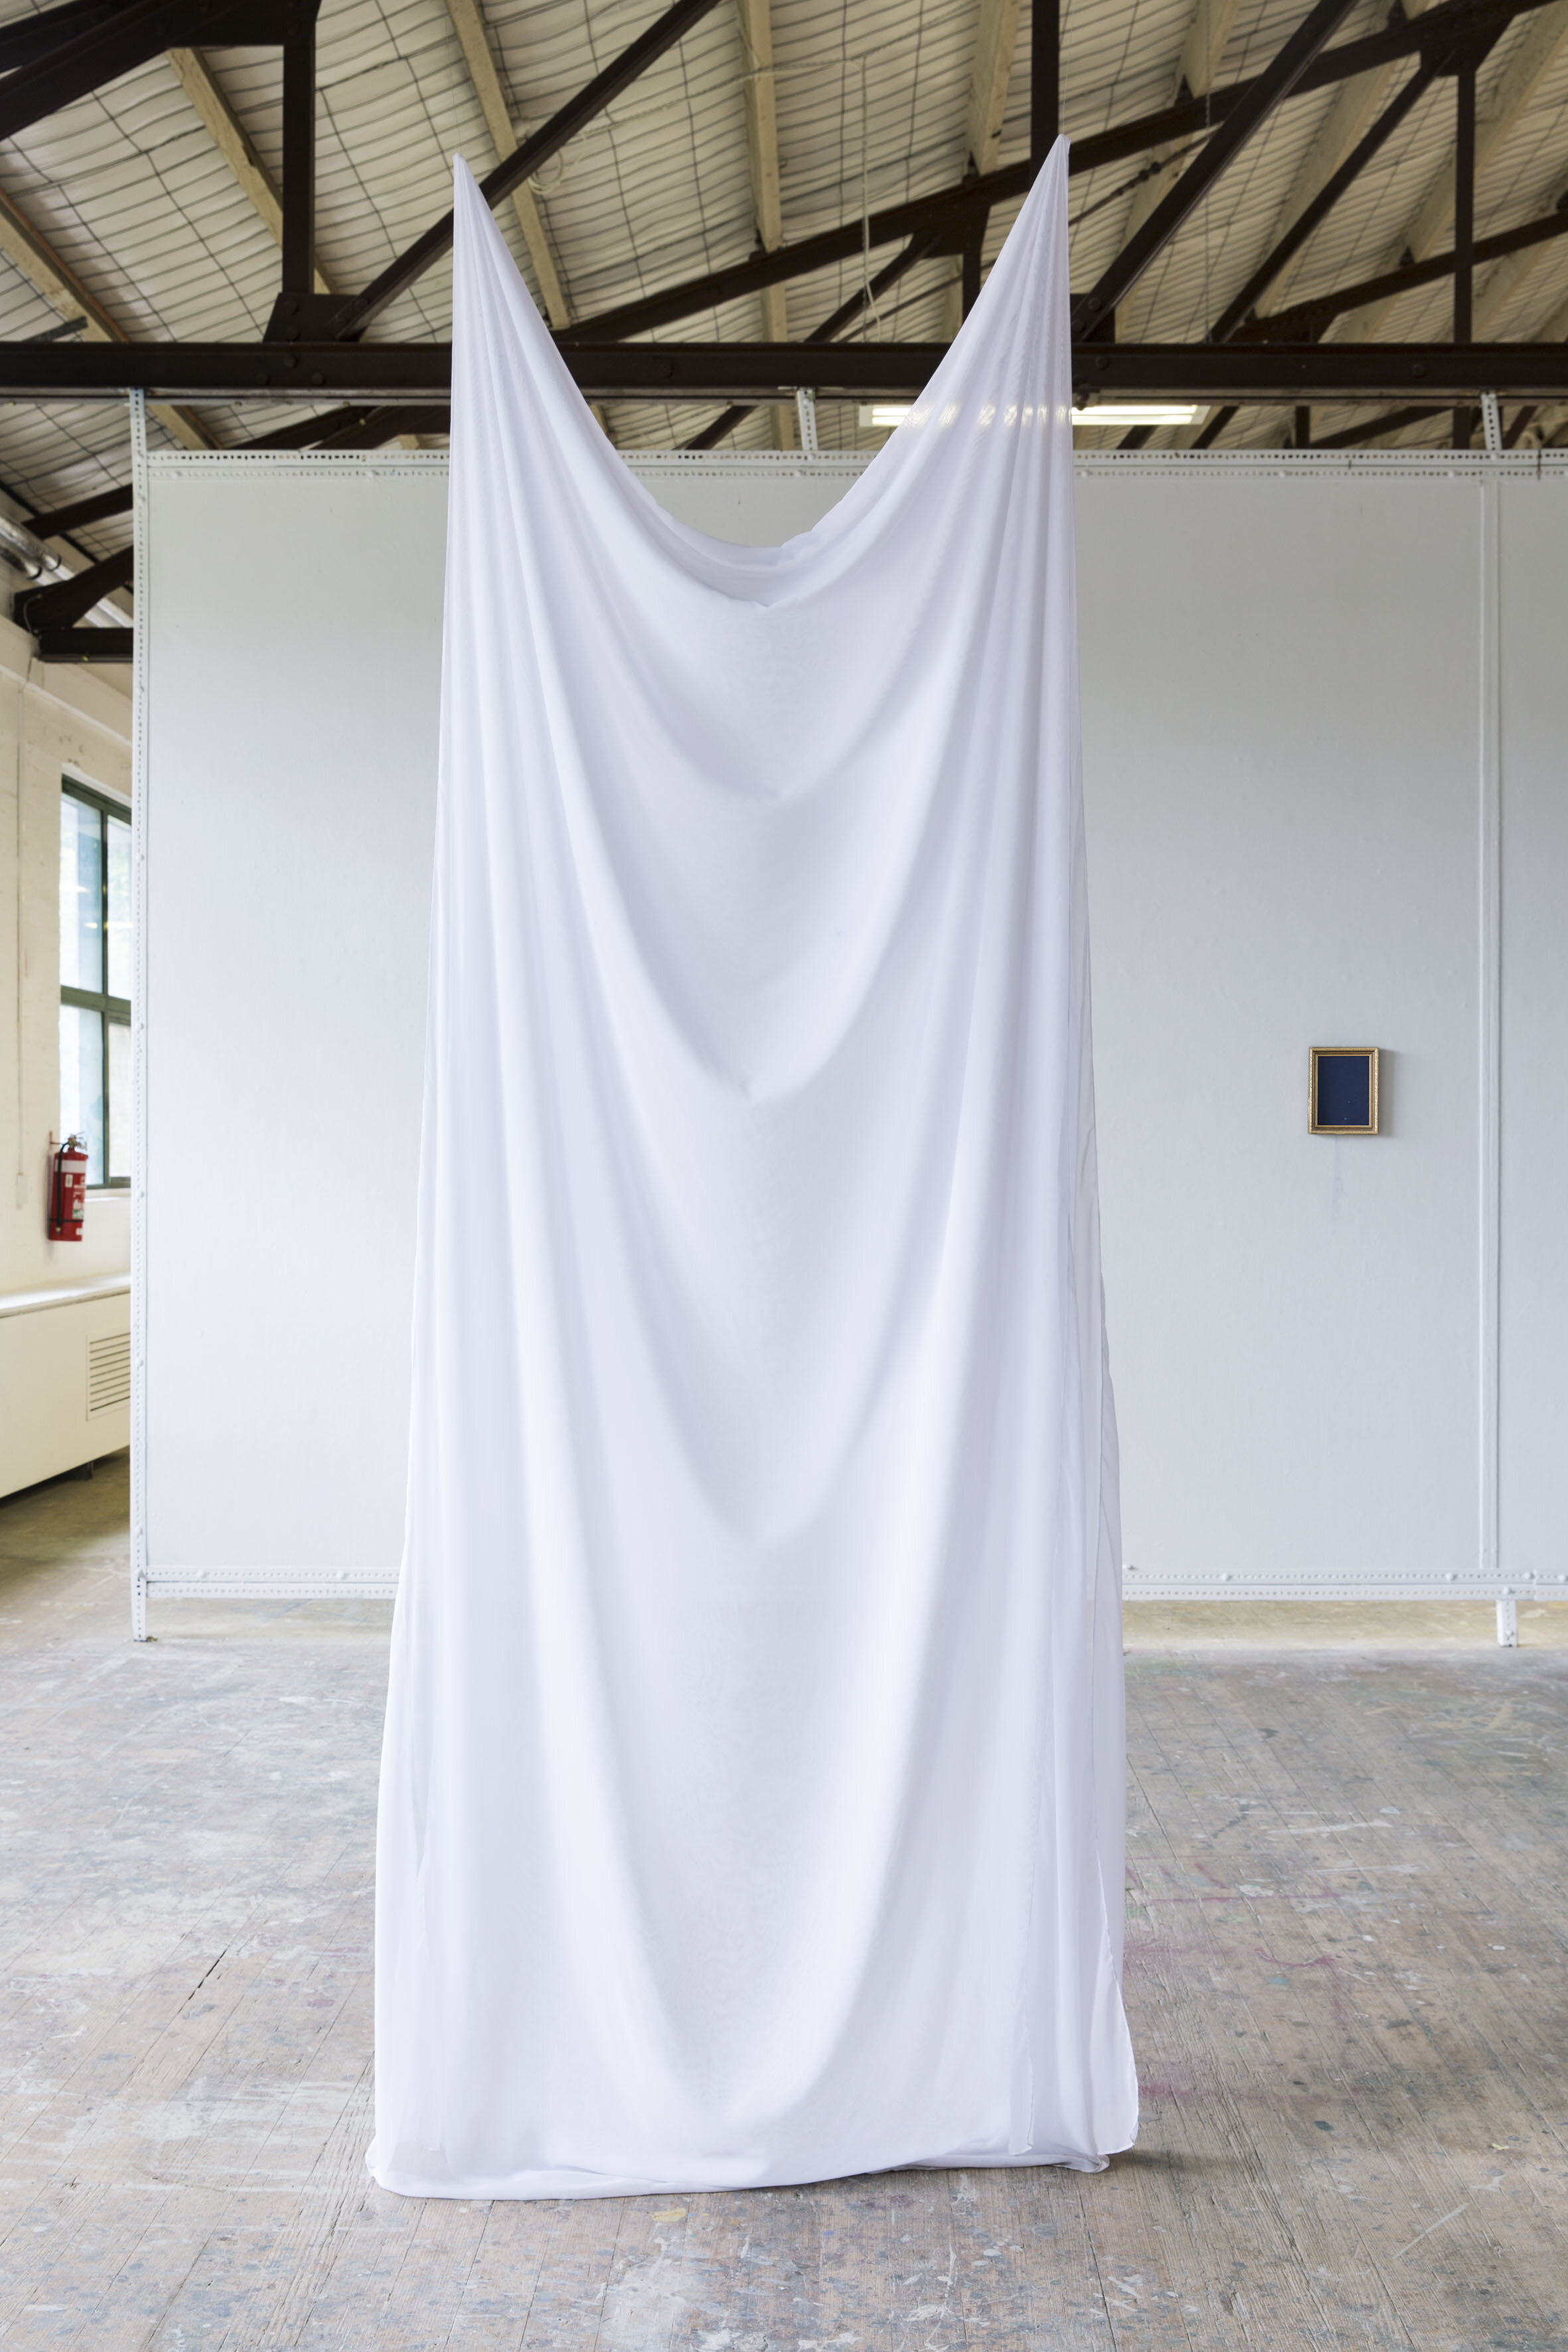  Concealed Embroidery on synthetic material  250 x 100 cm 2019 (install display) Photograph by Lucy Foster 